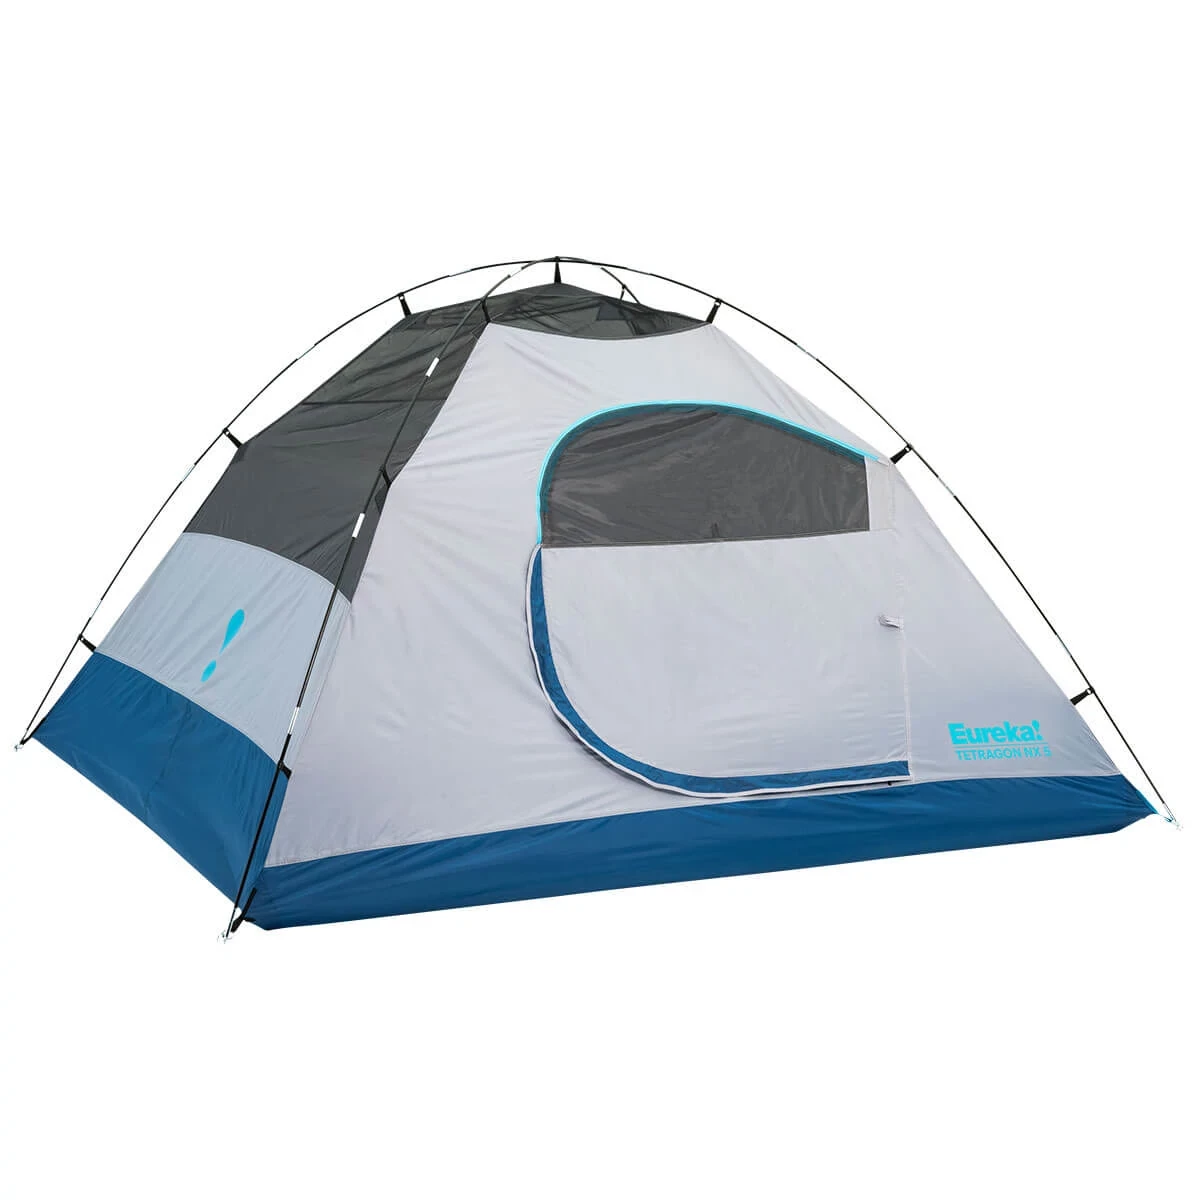 Tetragon NX 5 tent without rainfly